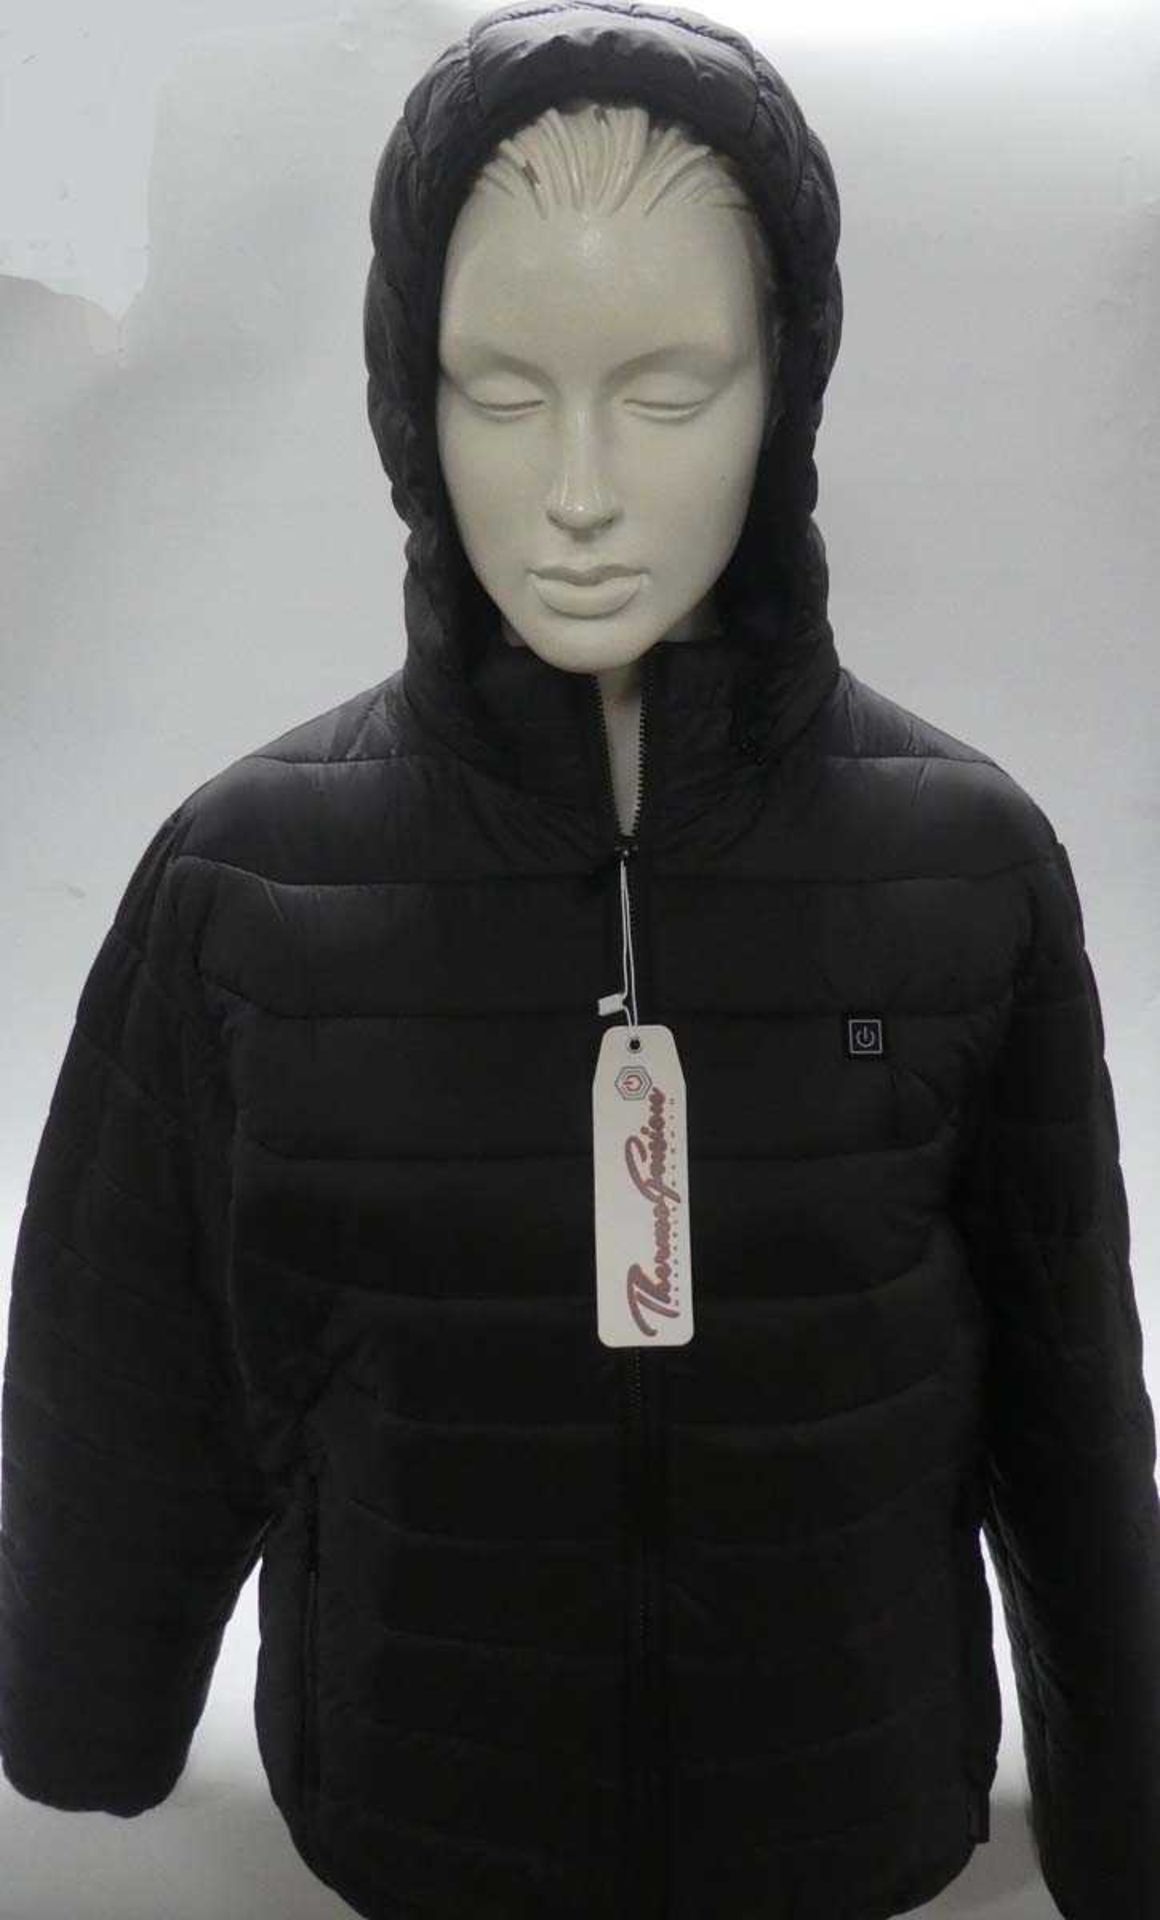 +VAT Thermofusion heated jacket with 5000mAh battery pack size XXL